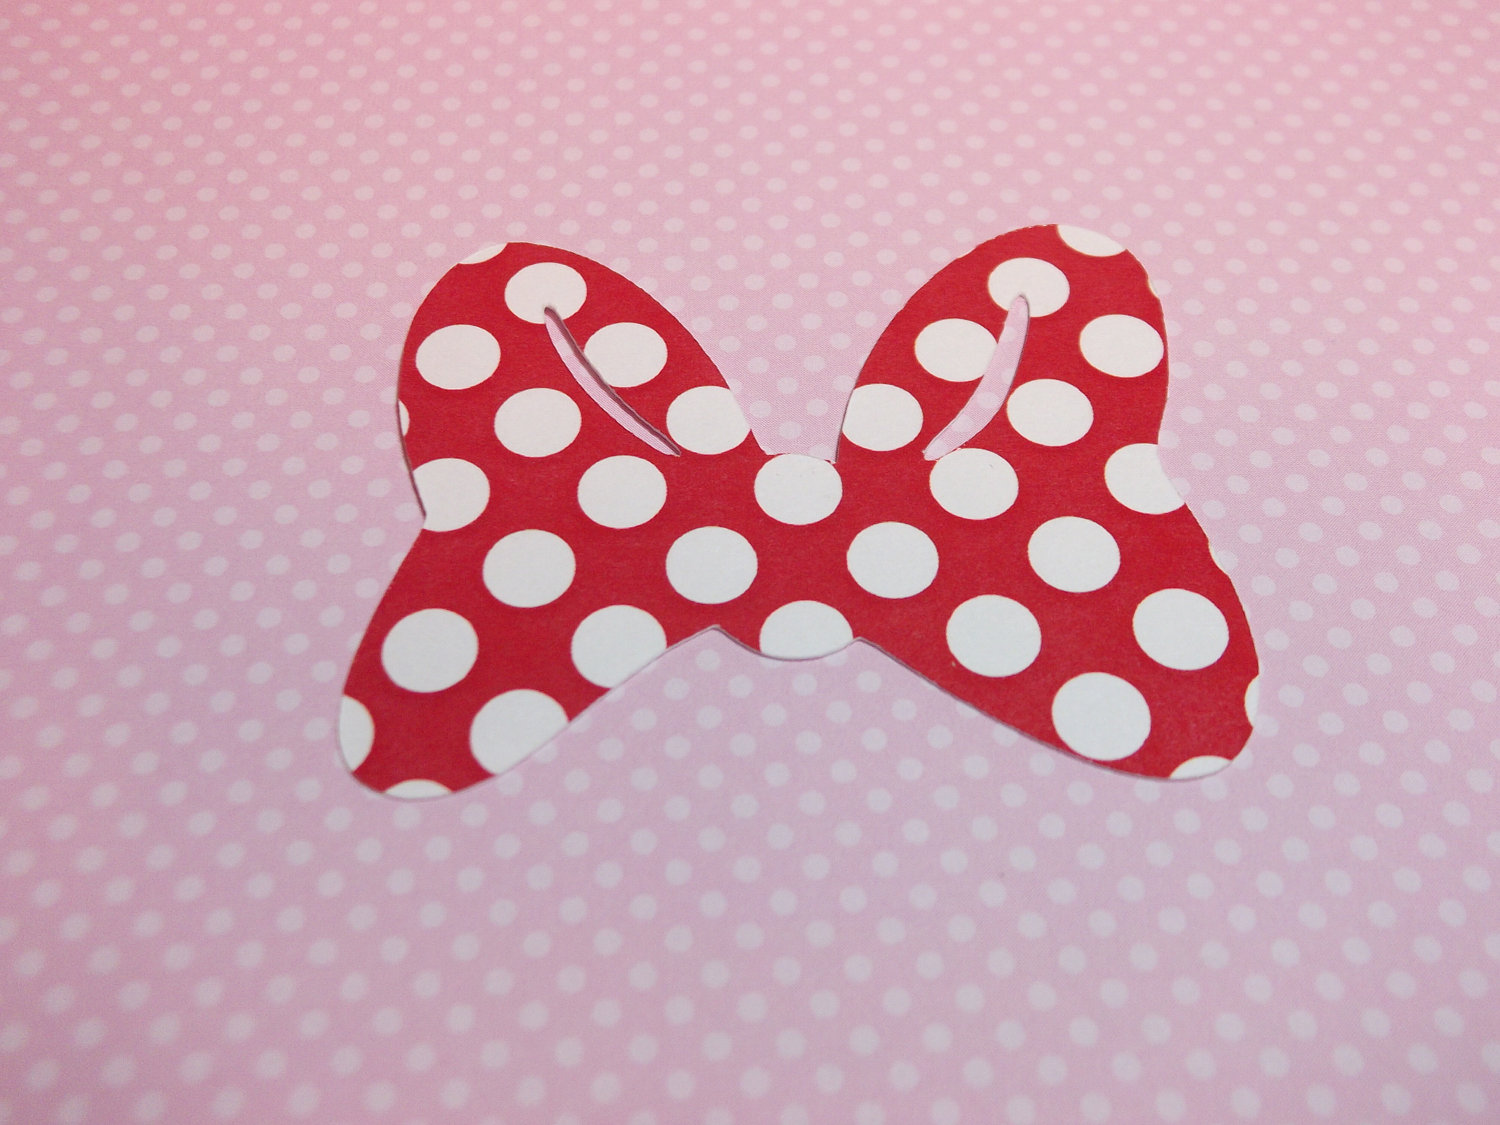 minnie mouse pink polka dot bow cut out